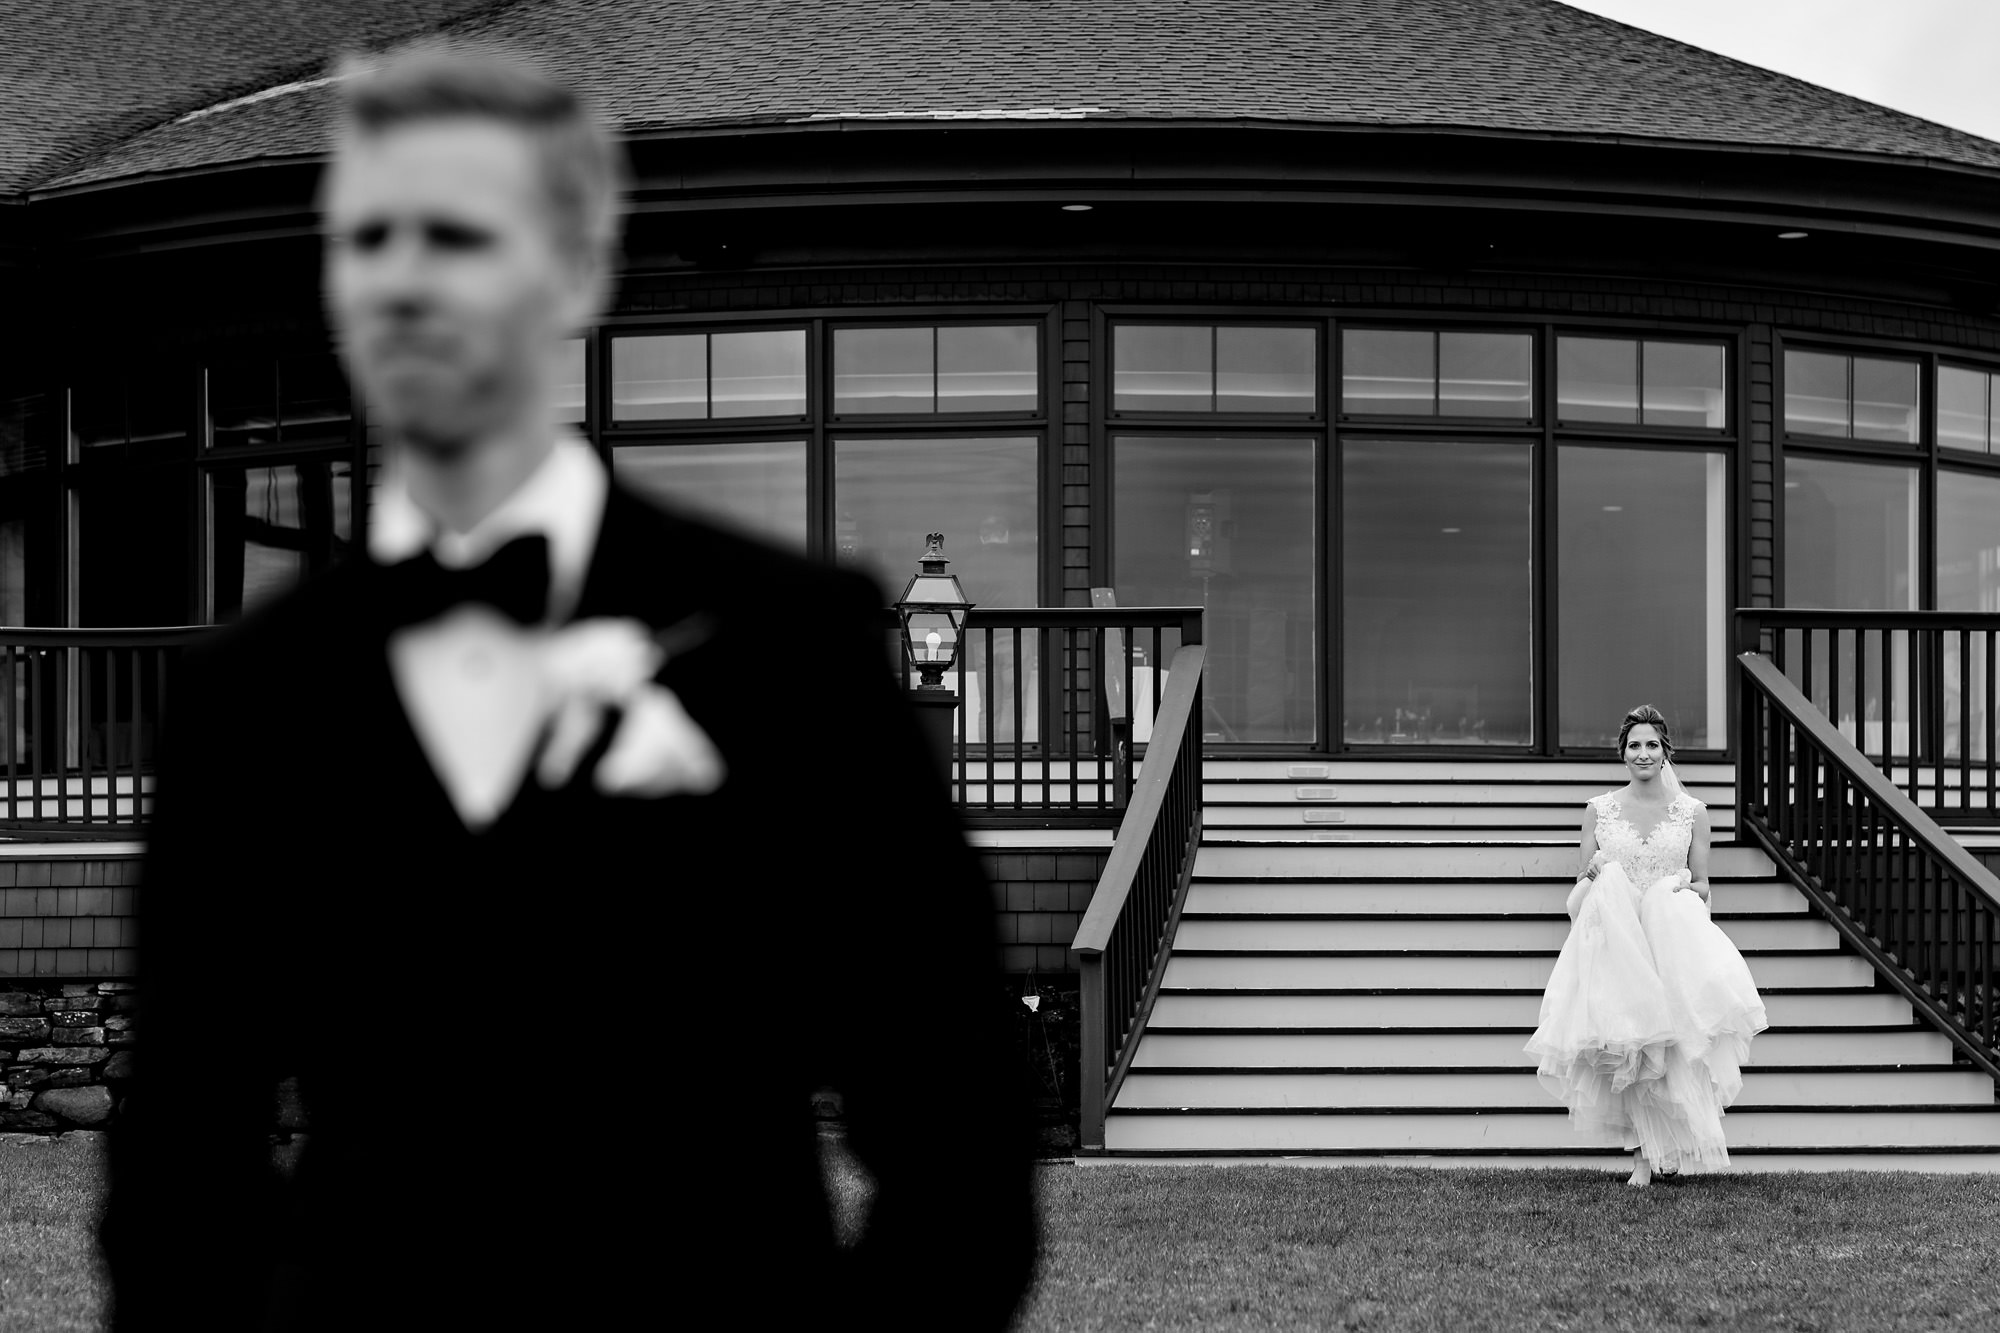 A beautiful first look at a wedding at Point Lookout in Northport, Maine